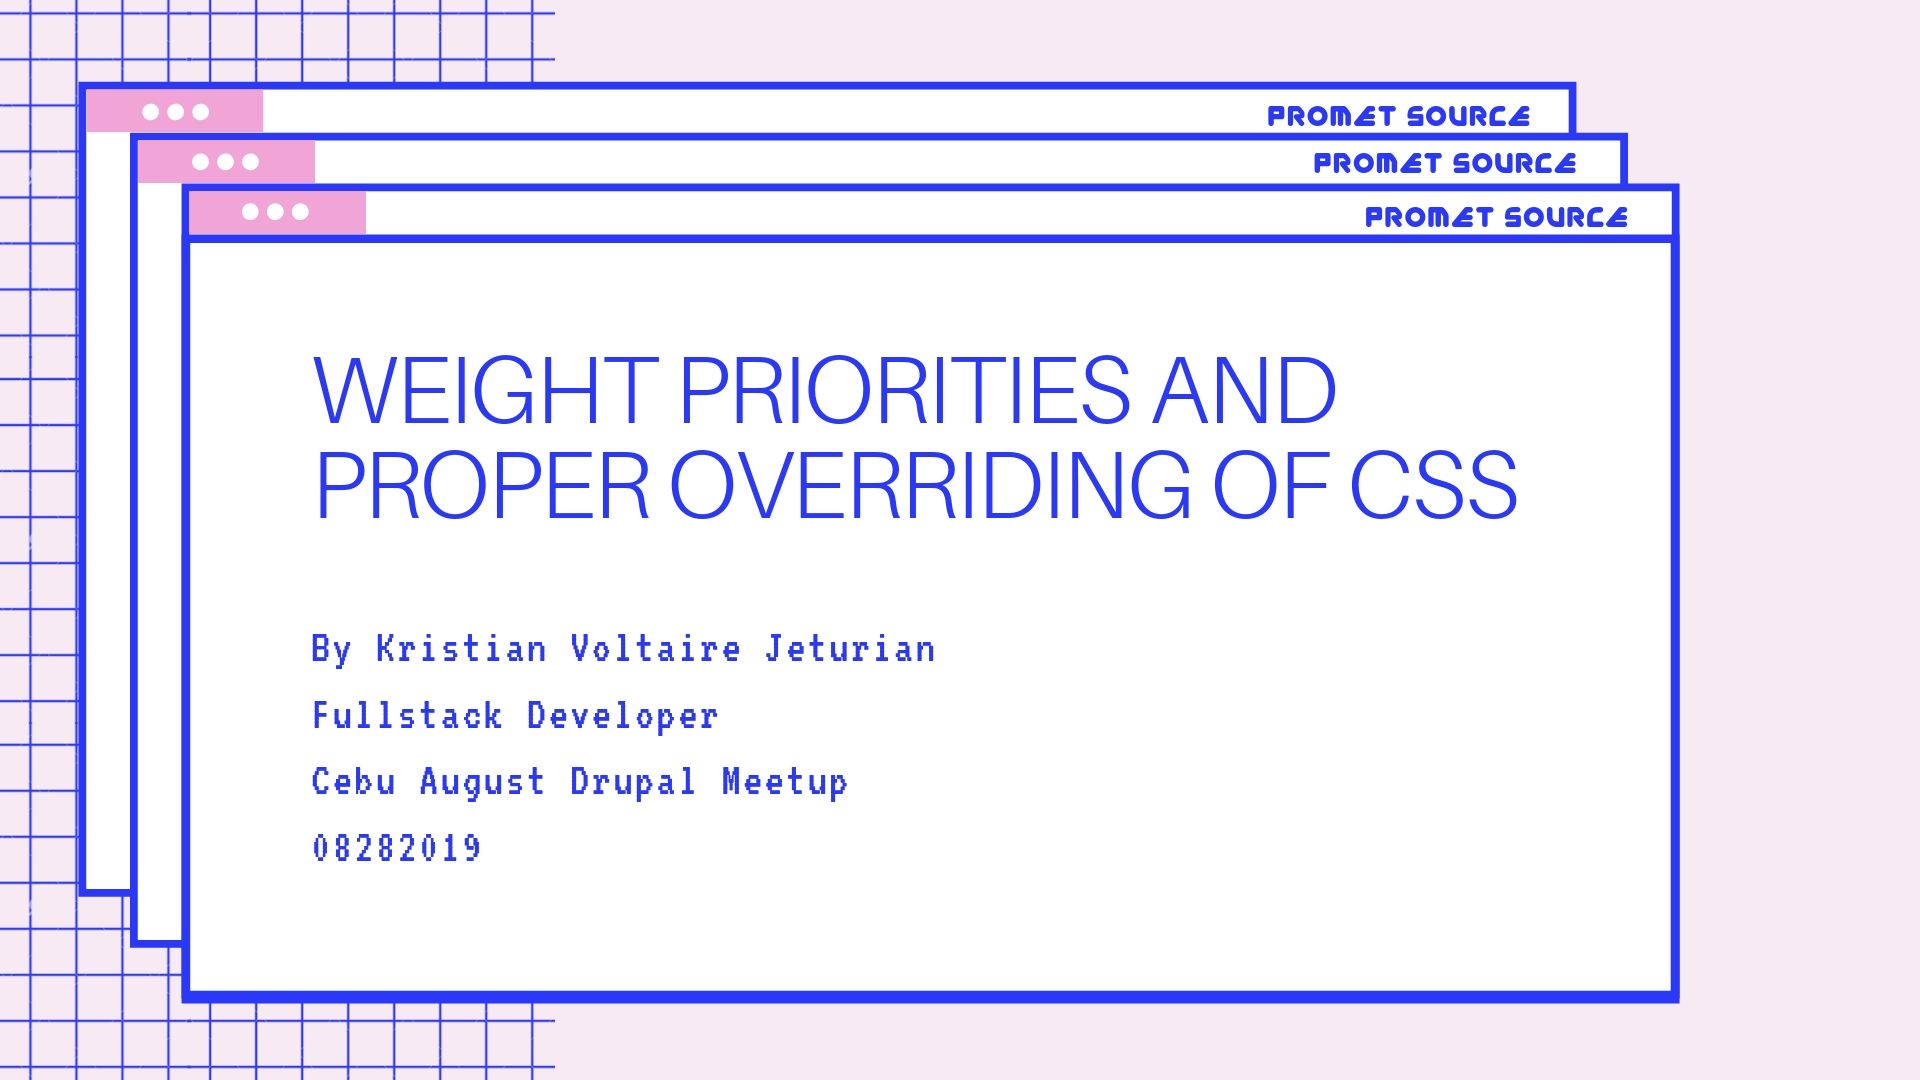 Weight Priorities and Proper Overriding of CSS